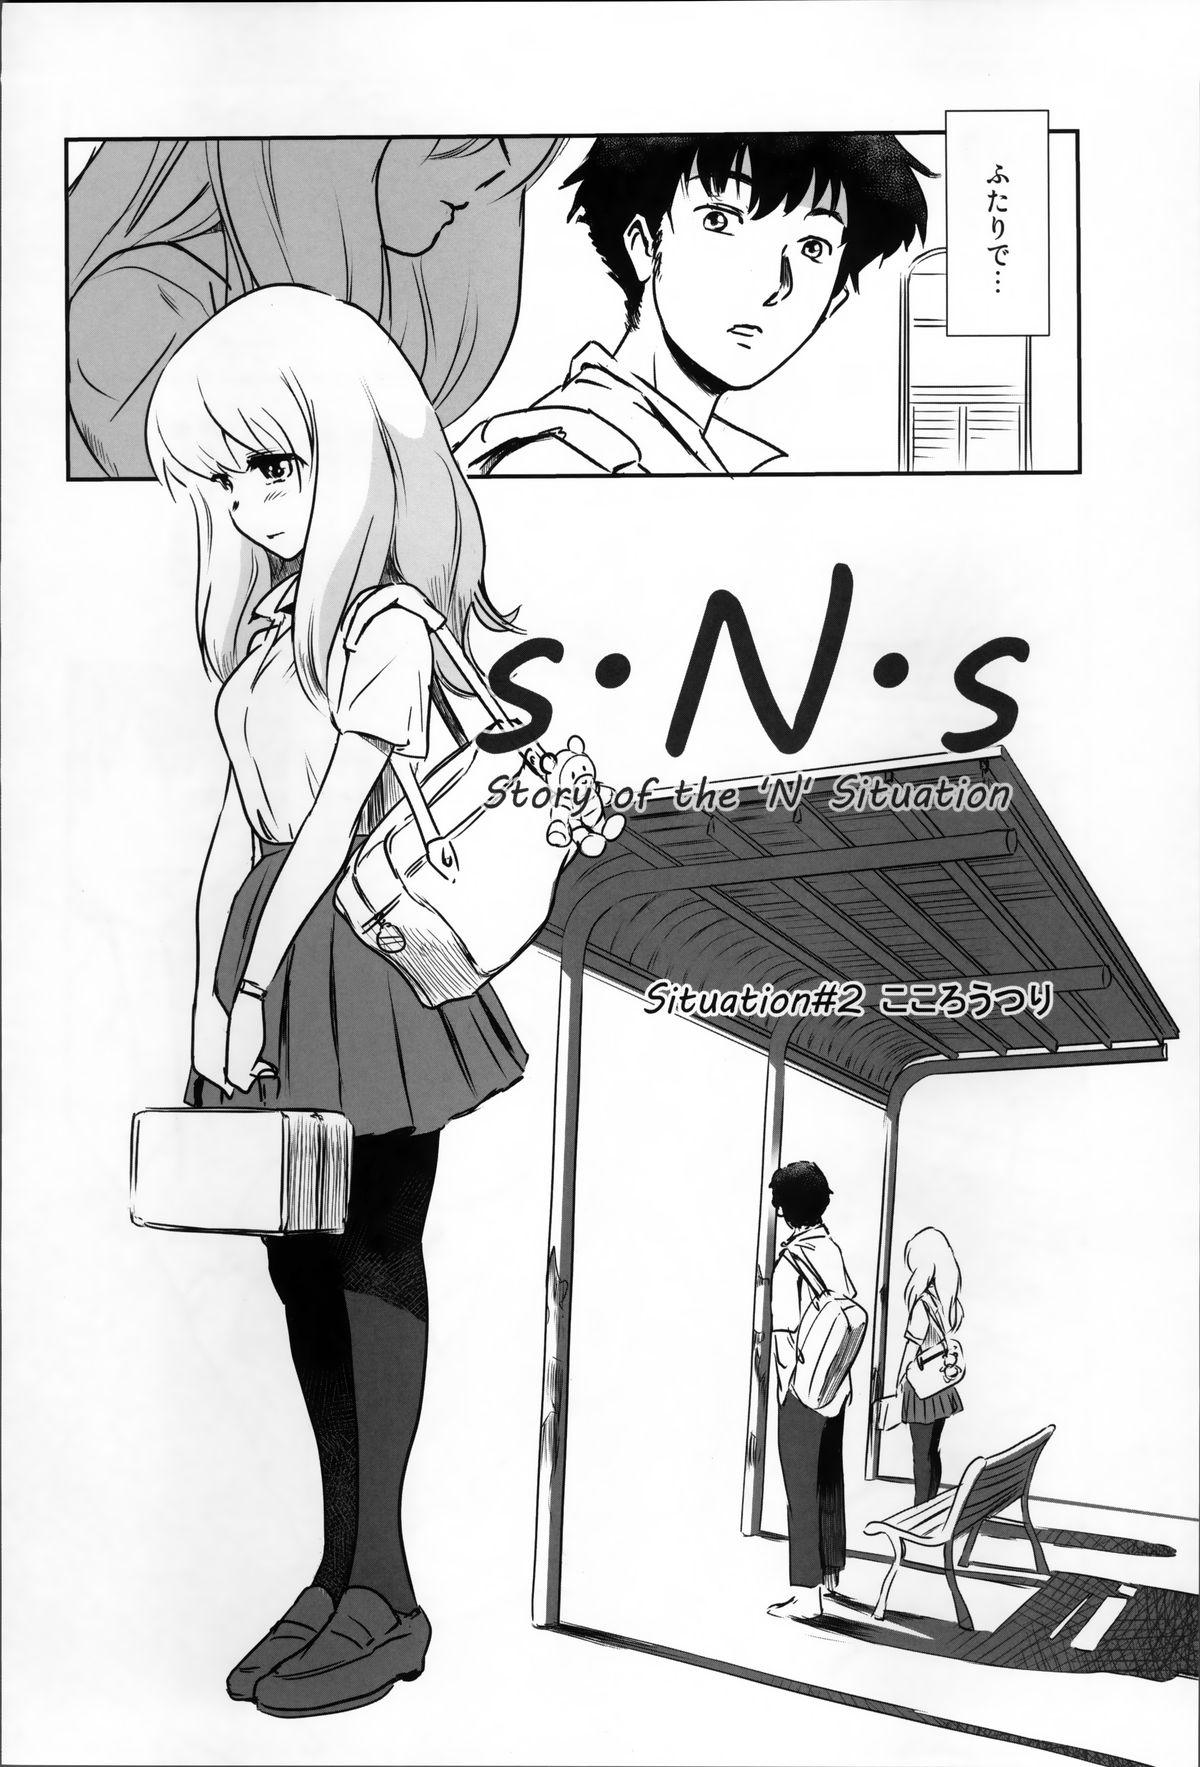 Cum On Ass Story of the 'N' Situation - Situation#2 Kokoro Utsuri Rough Fucking - Page 4